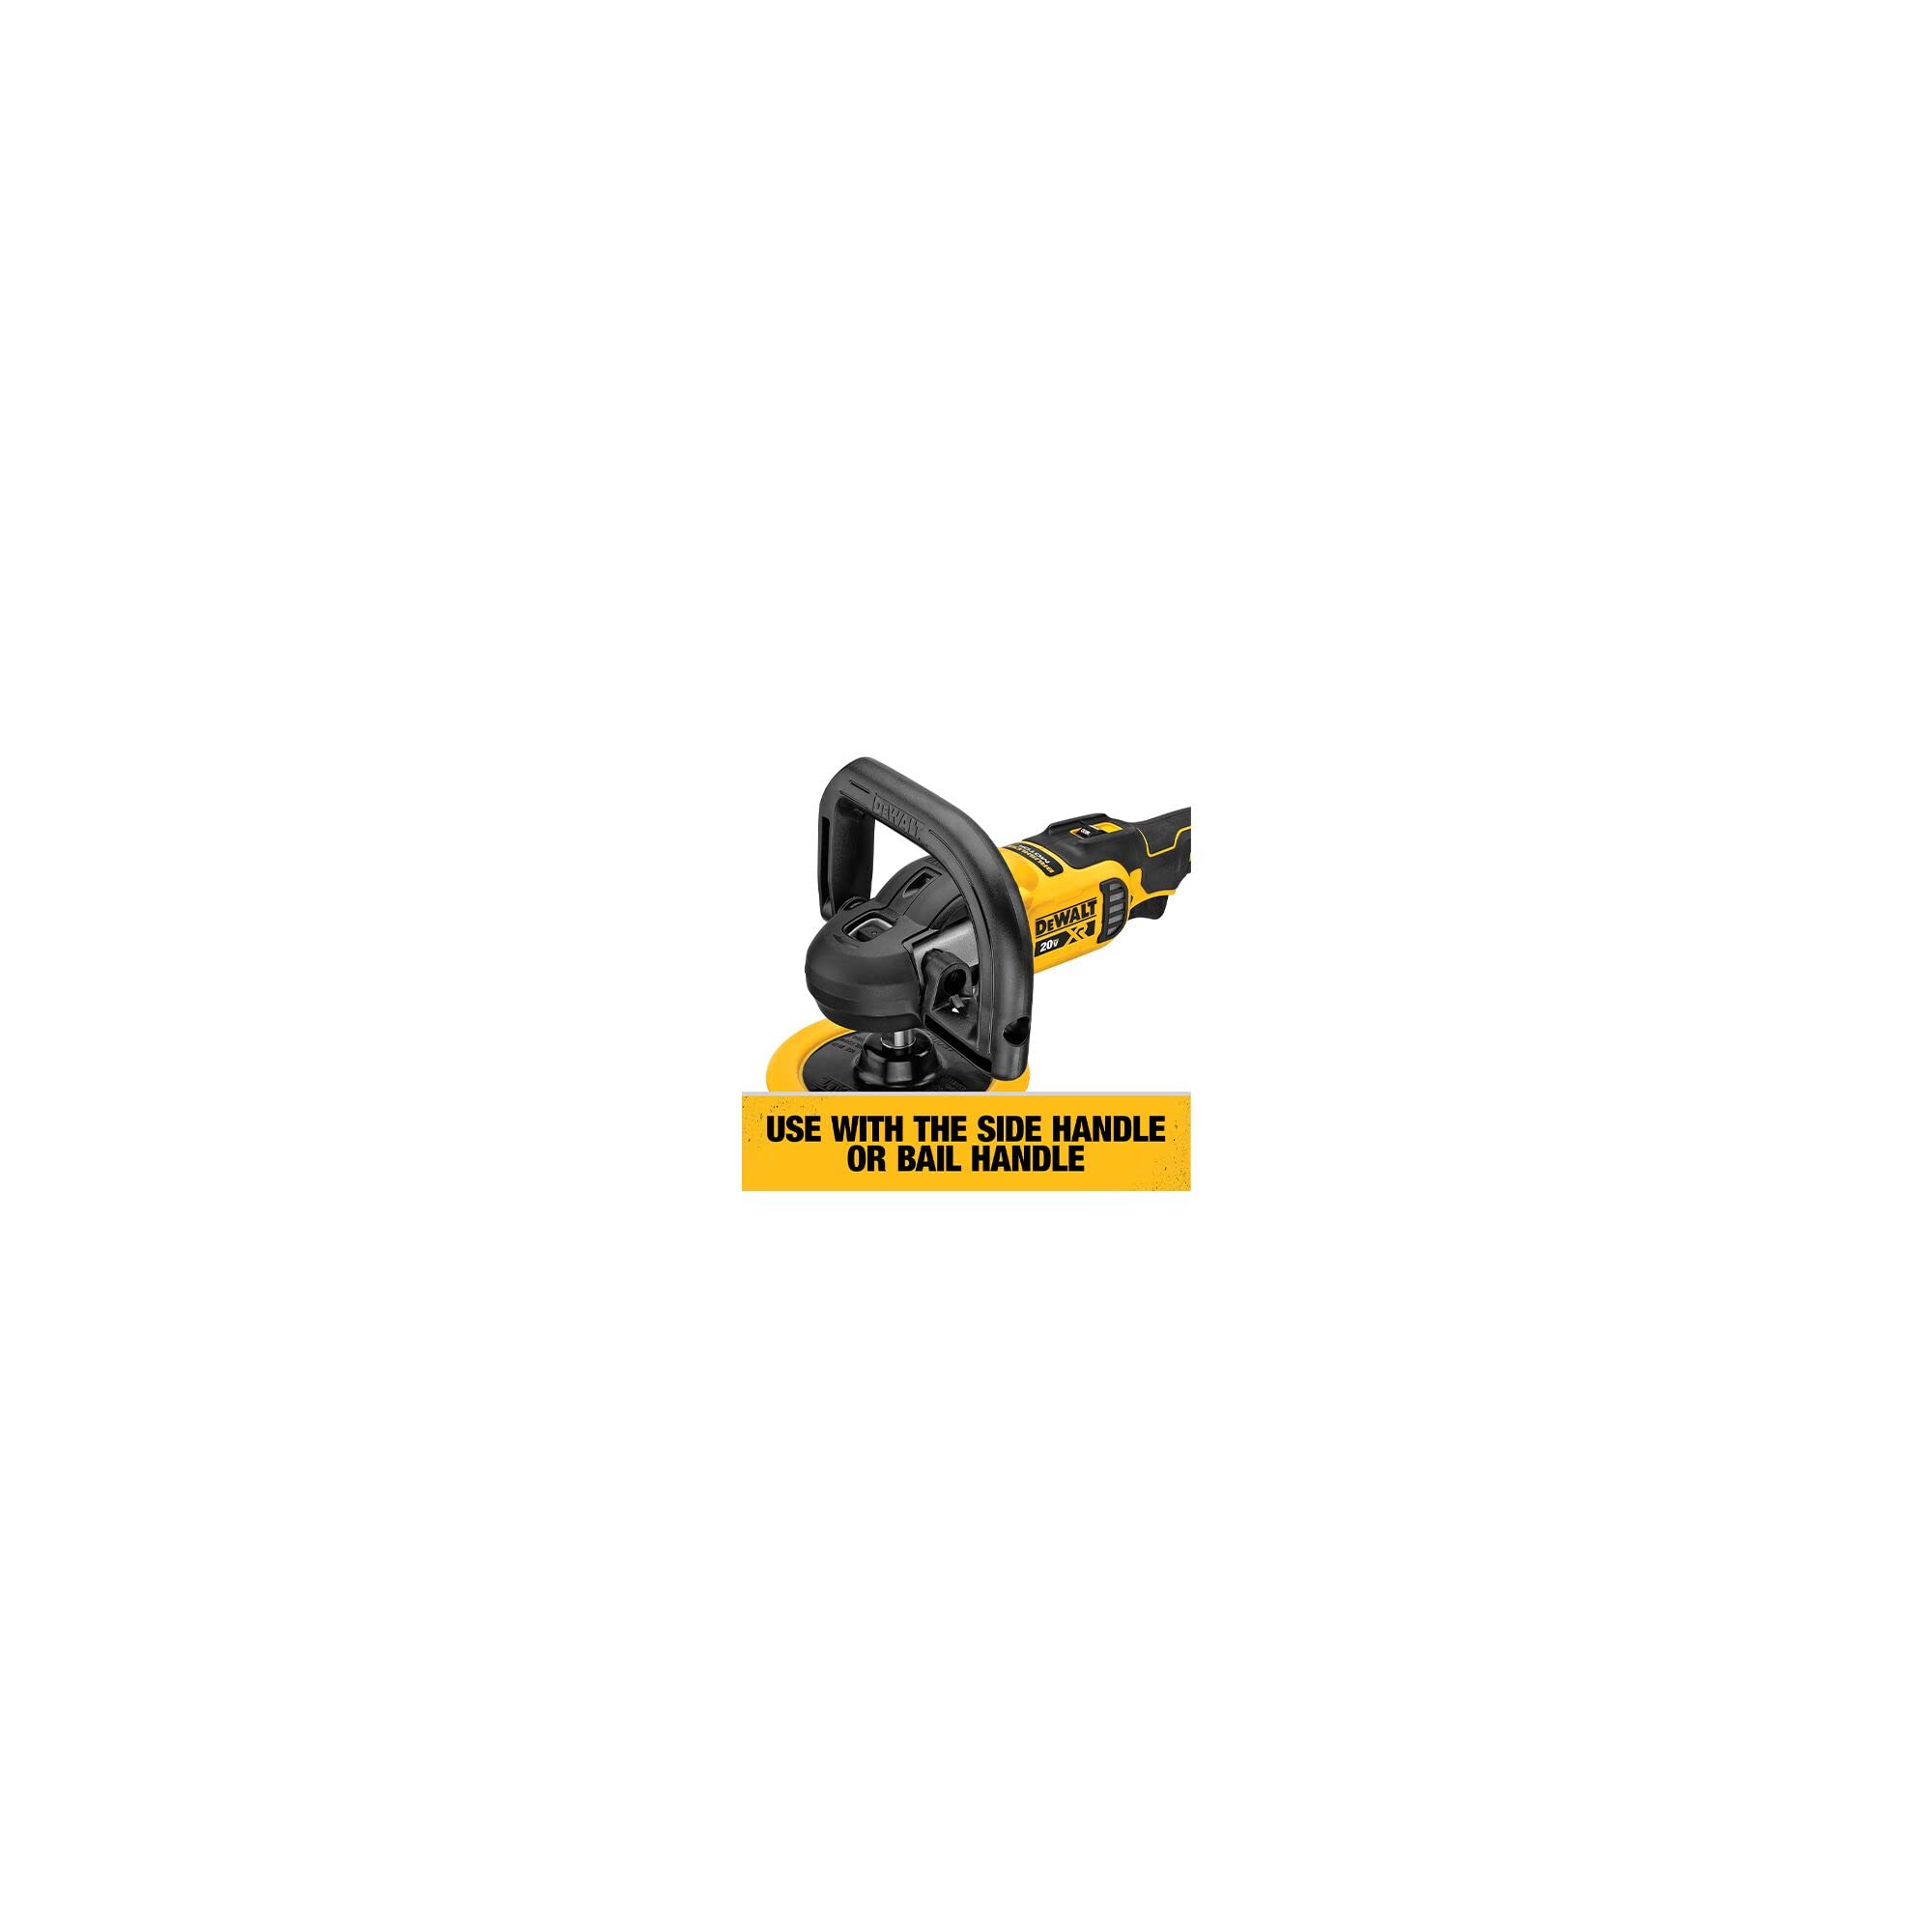 DEWALT 20V MAX* XR Cordless Polisher, Rotary, Variable Speed, 7-Inch, 180 mm, Tool Only (DCM849B)  - Like New